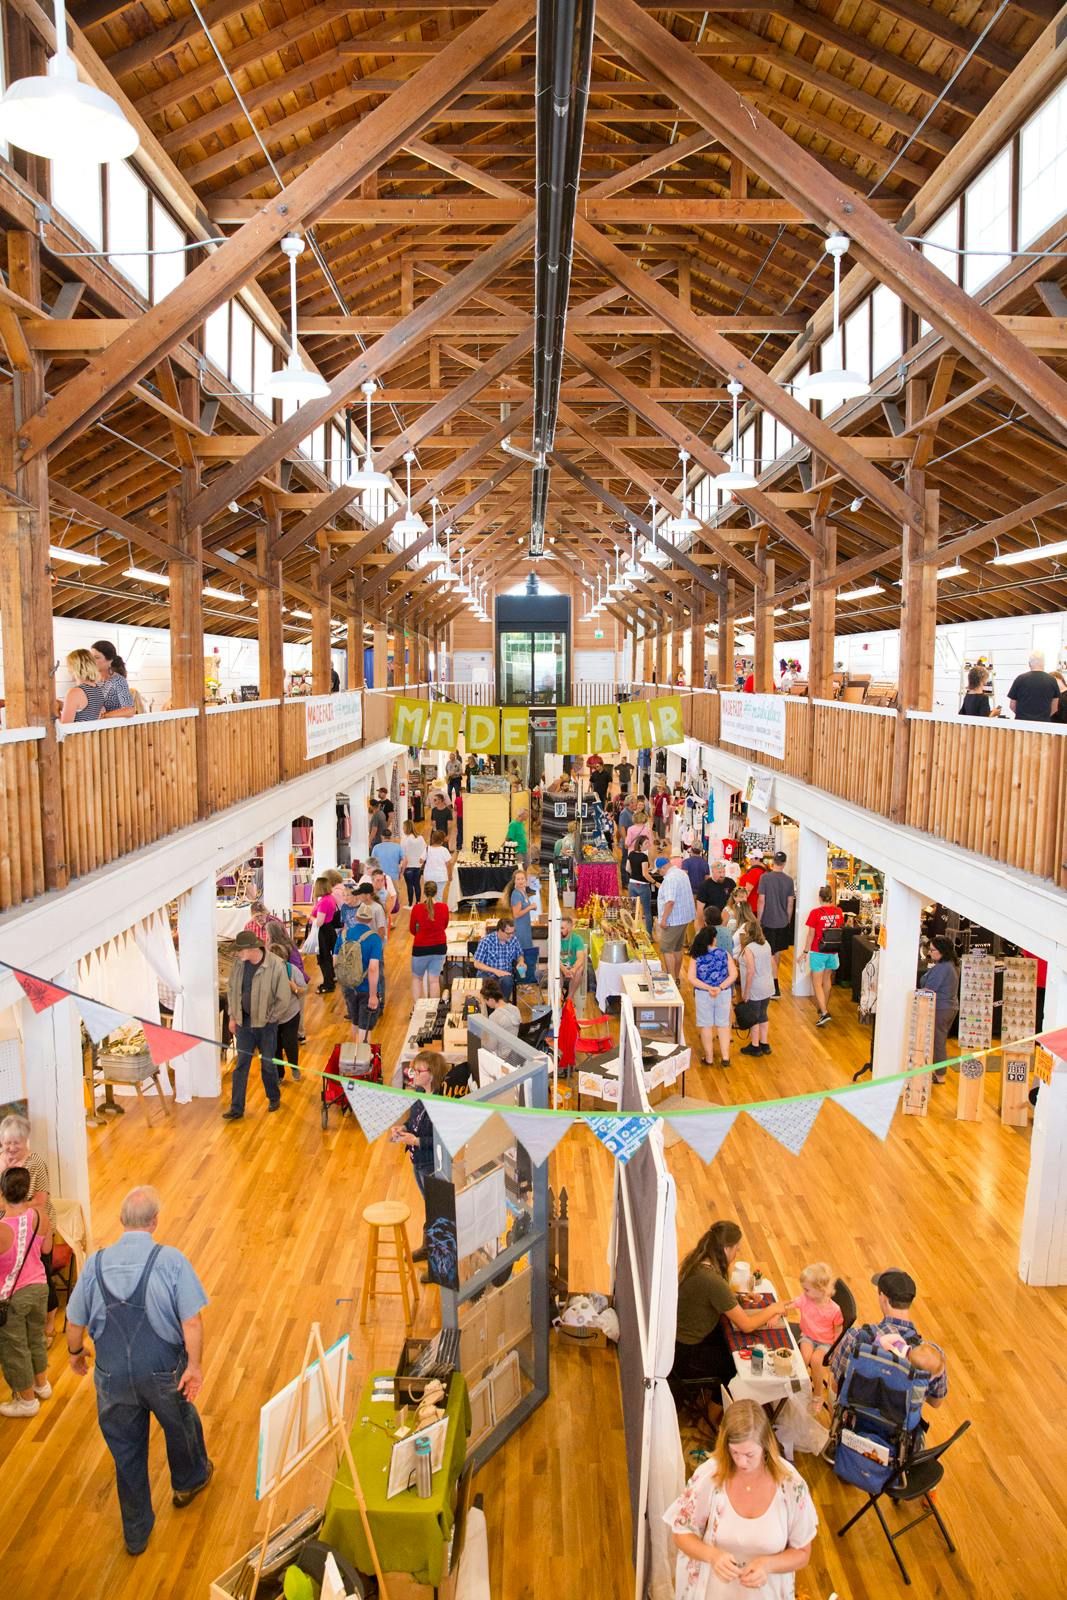 The Commercial Building on a busy day of the Made Fair. Craft vendors line the center of the room as people peruse the merchandise.